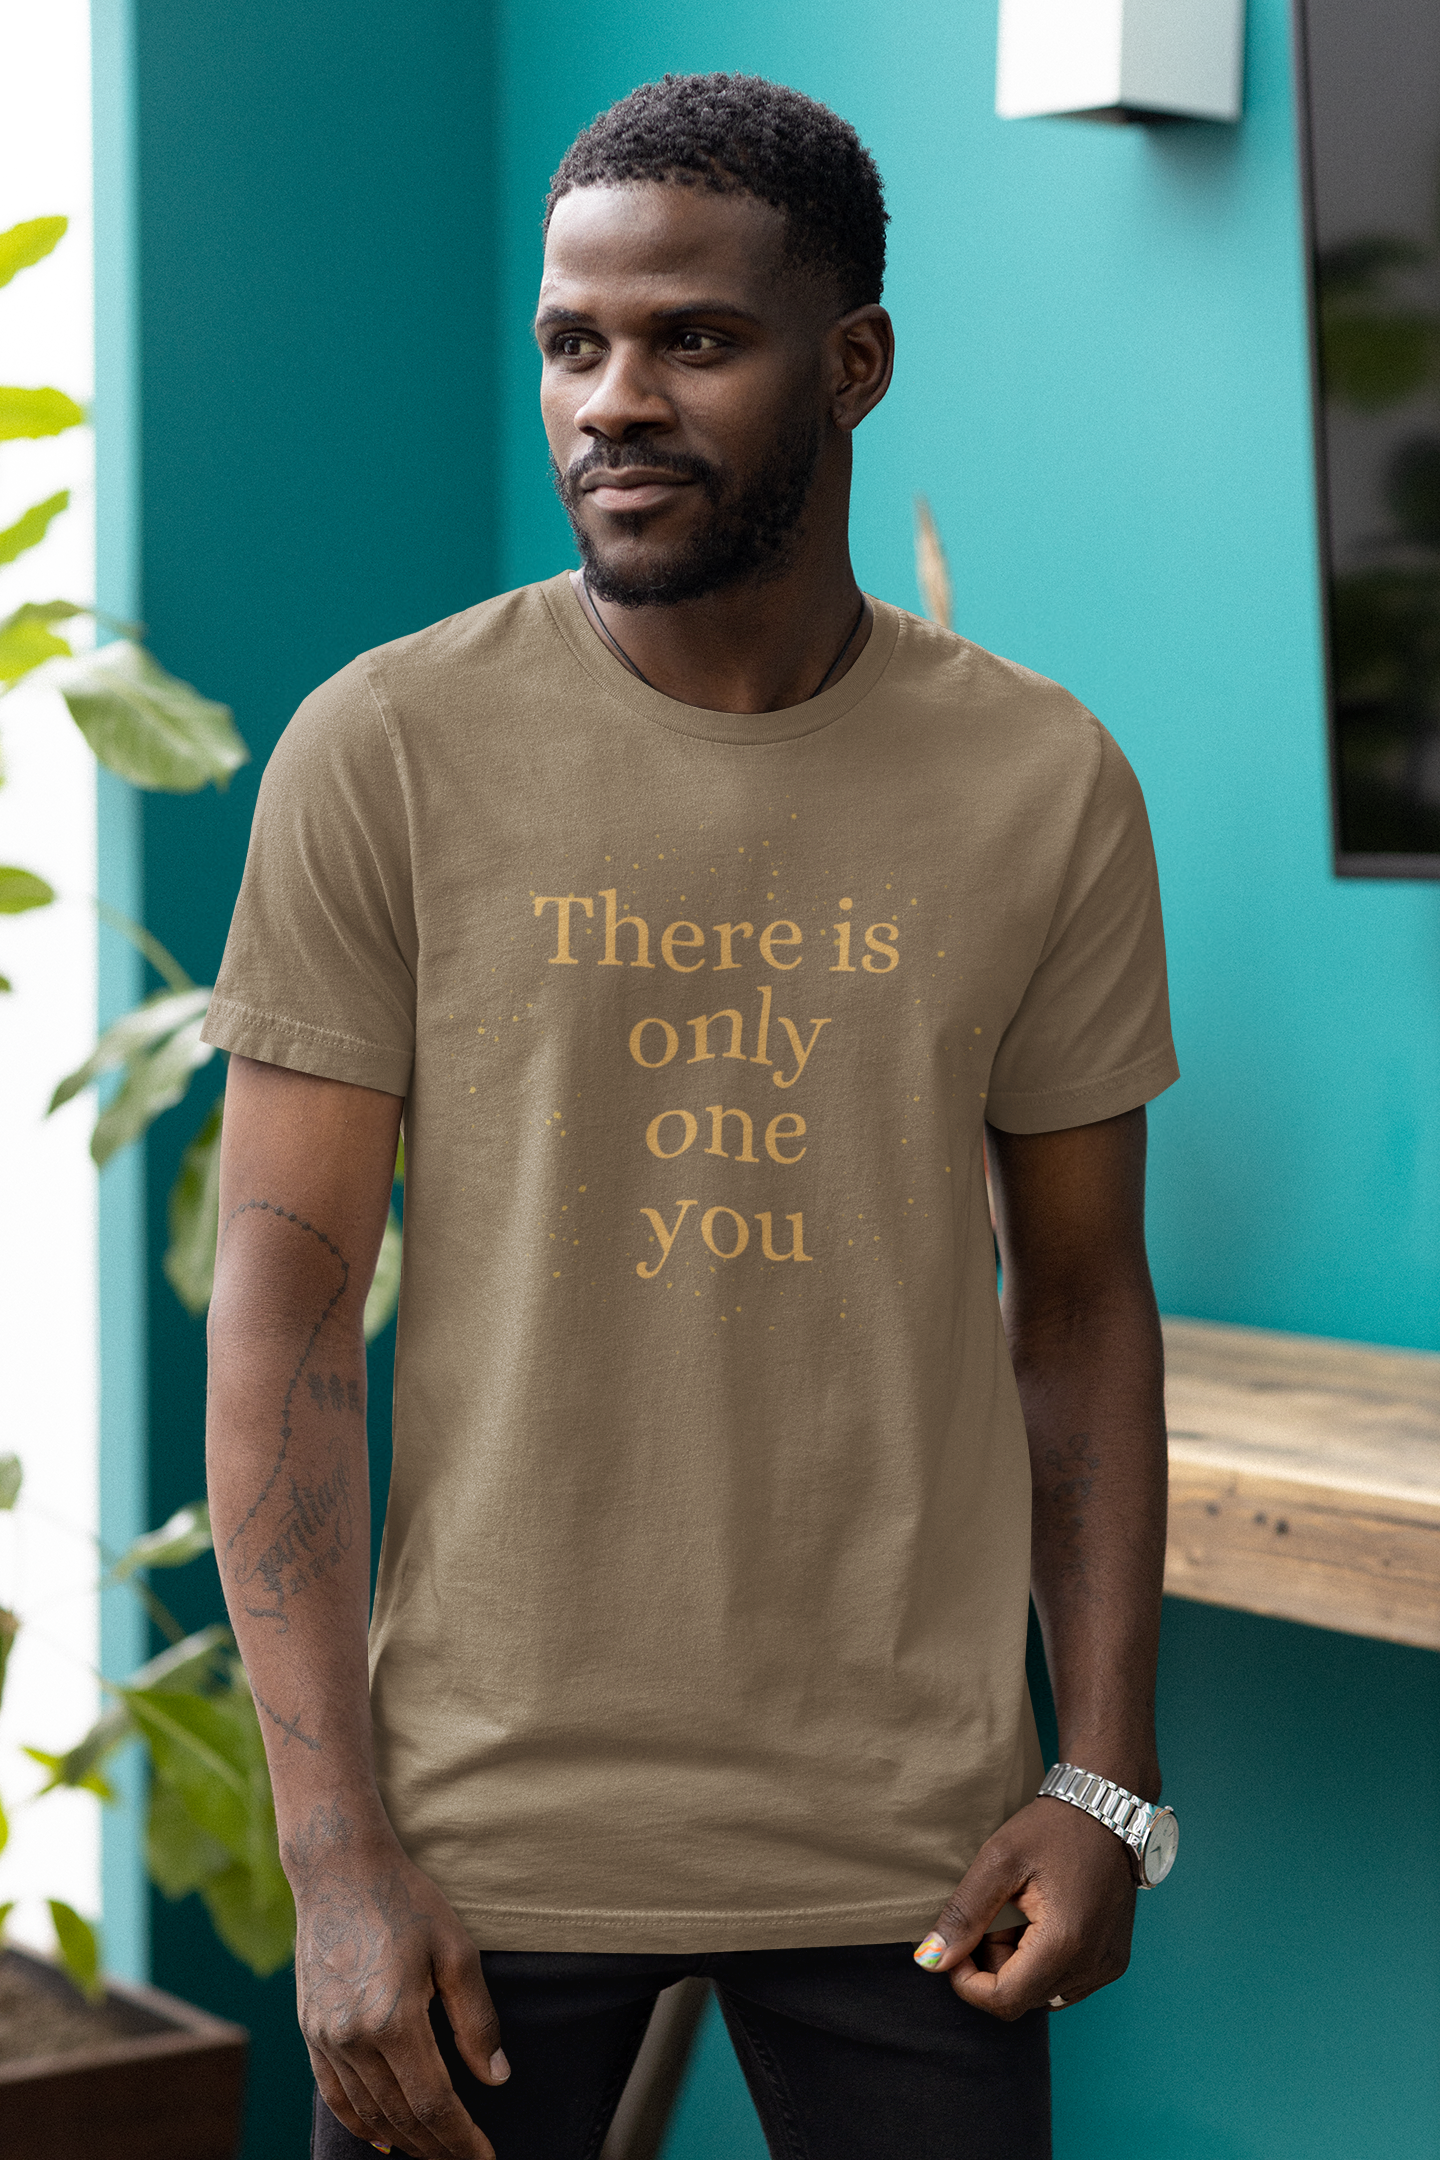 There Is Only One You Motivational T-Shirt - Unisex - Motivational Treats